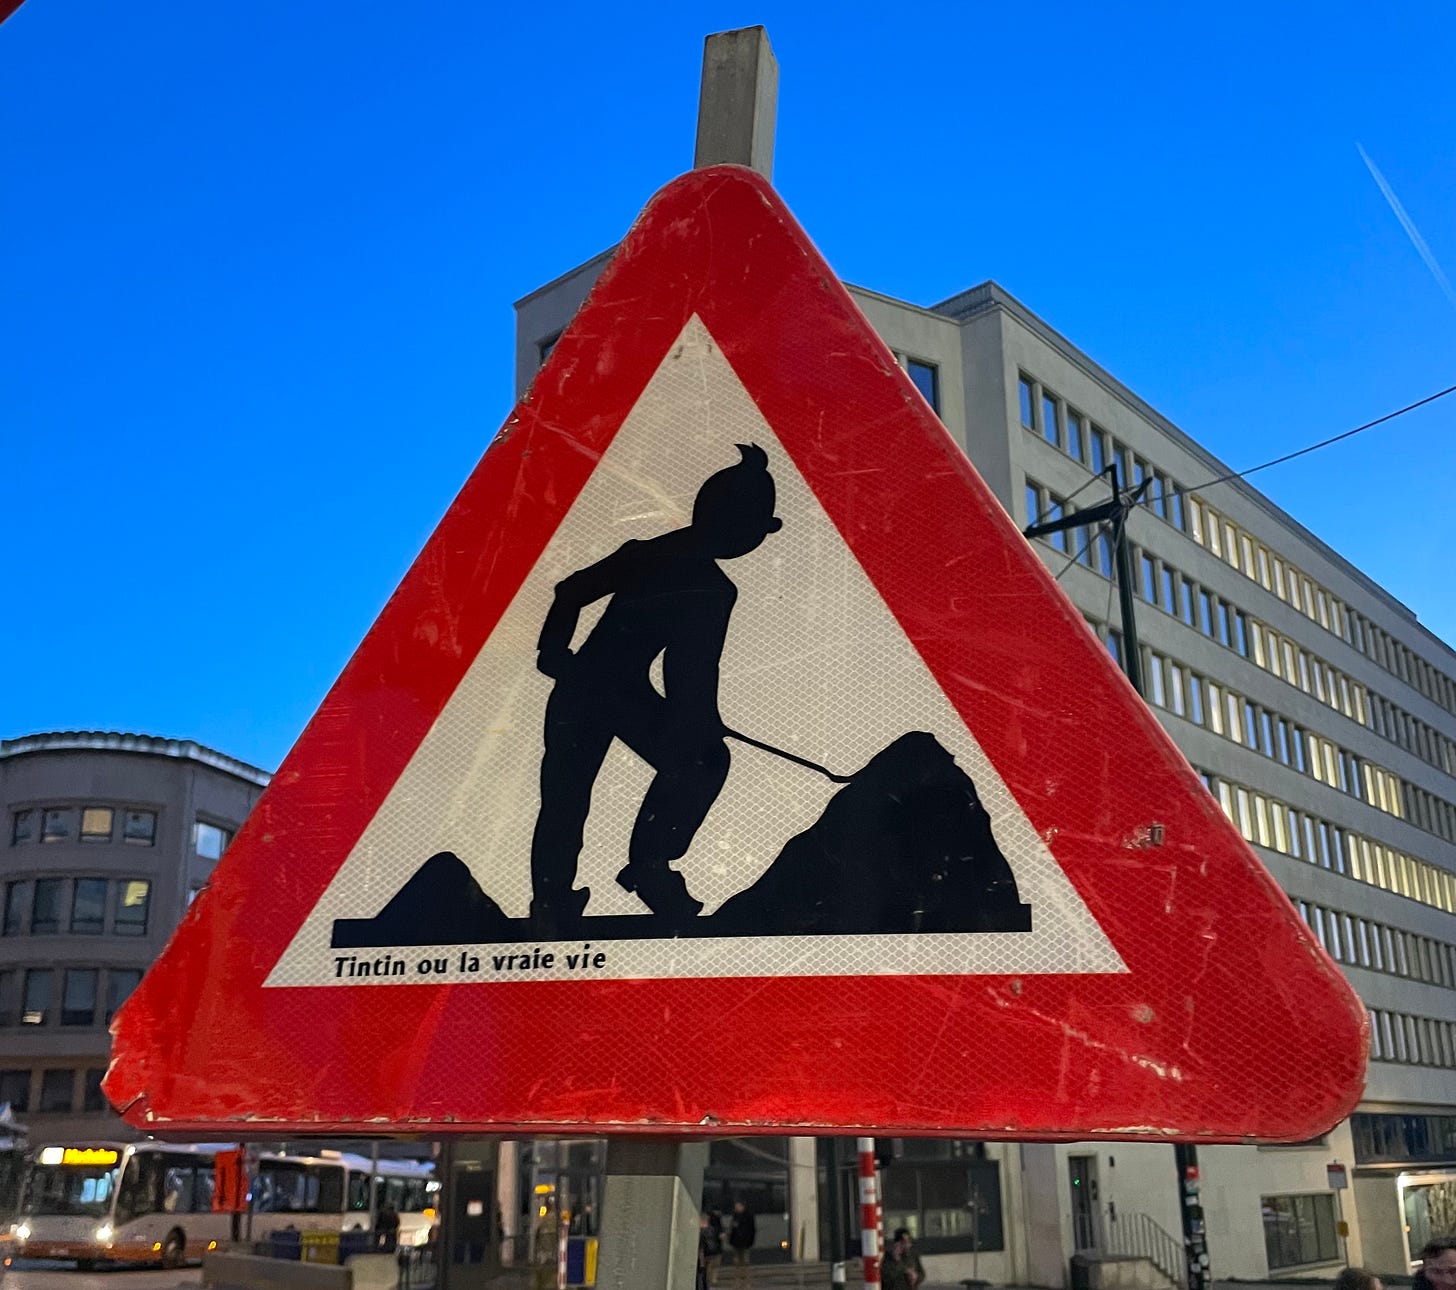 A triangular roadwork sign featuring Tintin with a shovel in silouette.